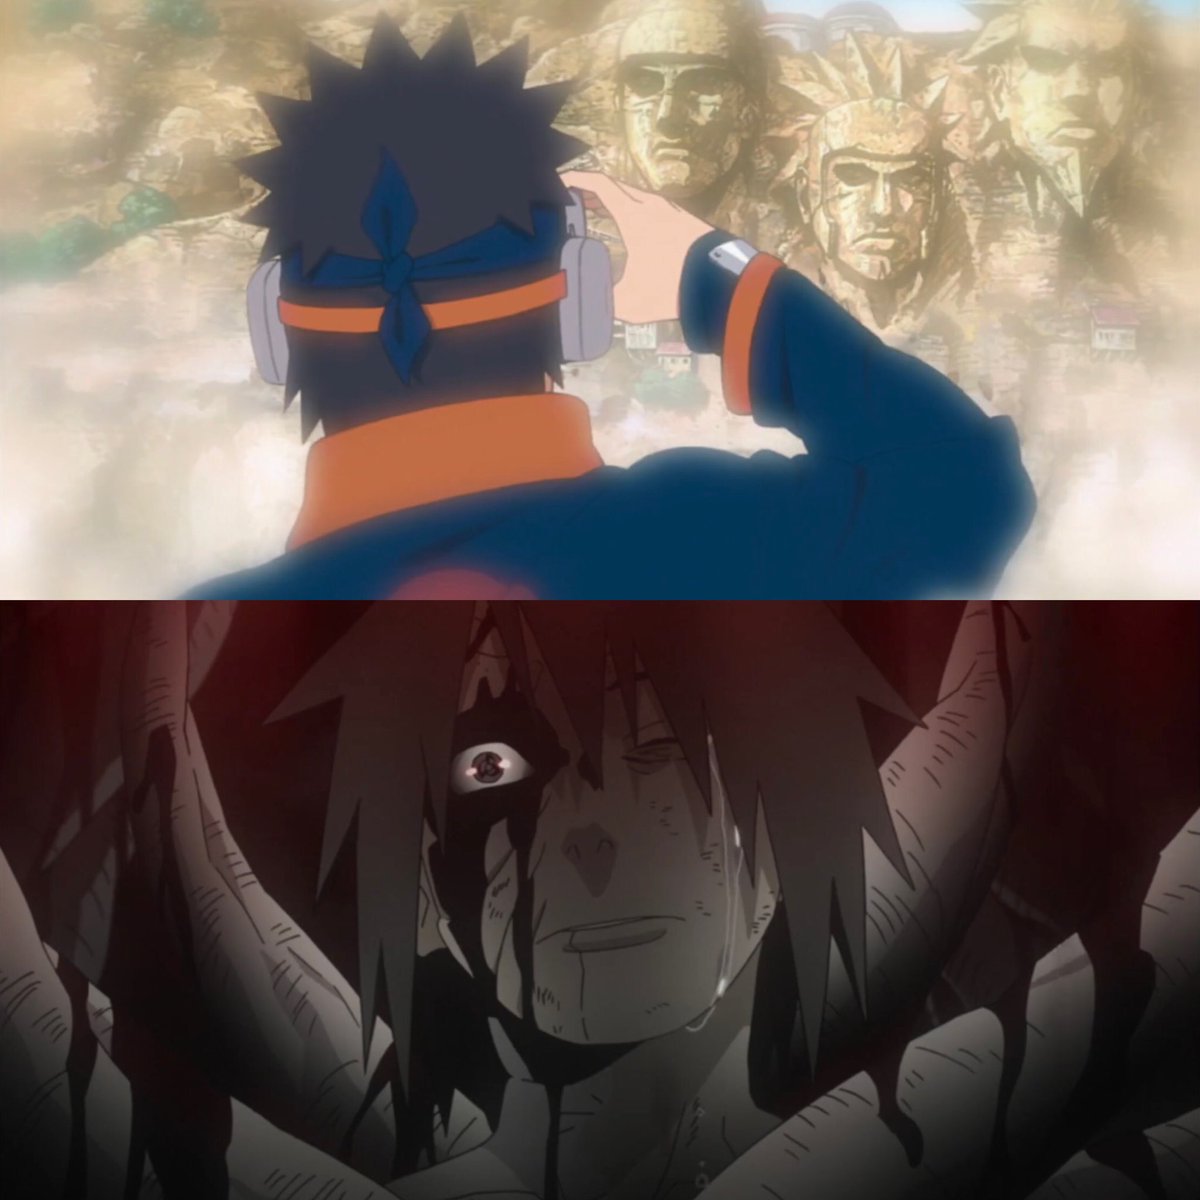 Happy birthday to one of the best antagonists in Naruto, Obito Uchiha!